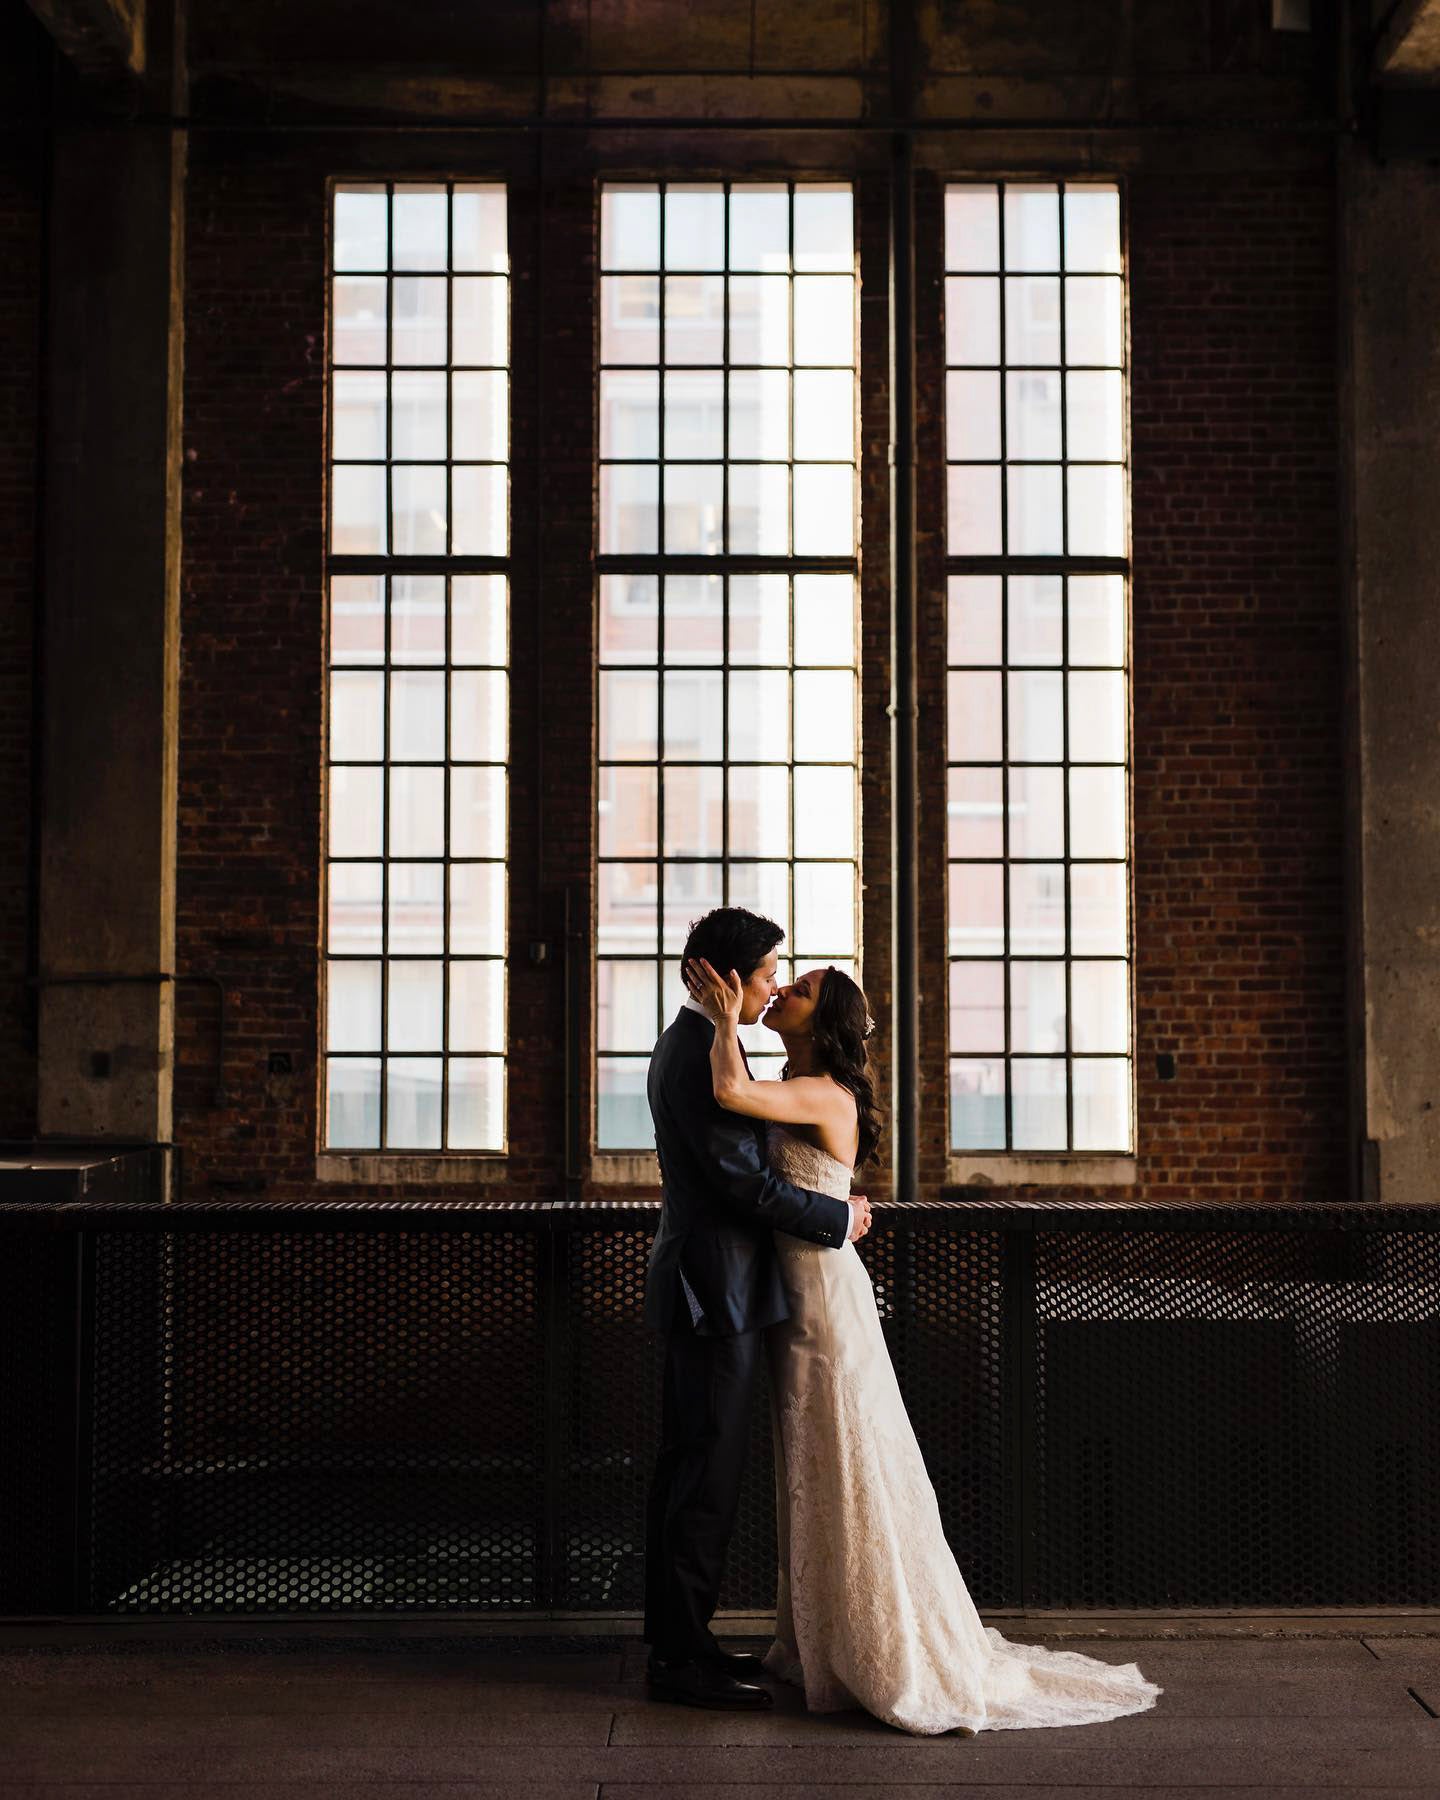 a newly wed couple kissing in front of a large window in a low light setting